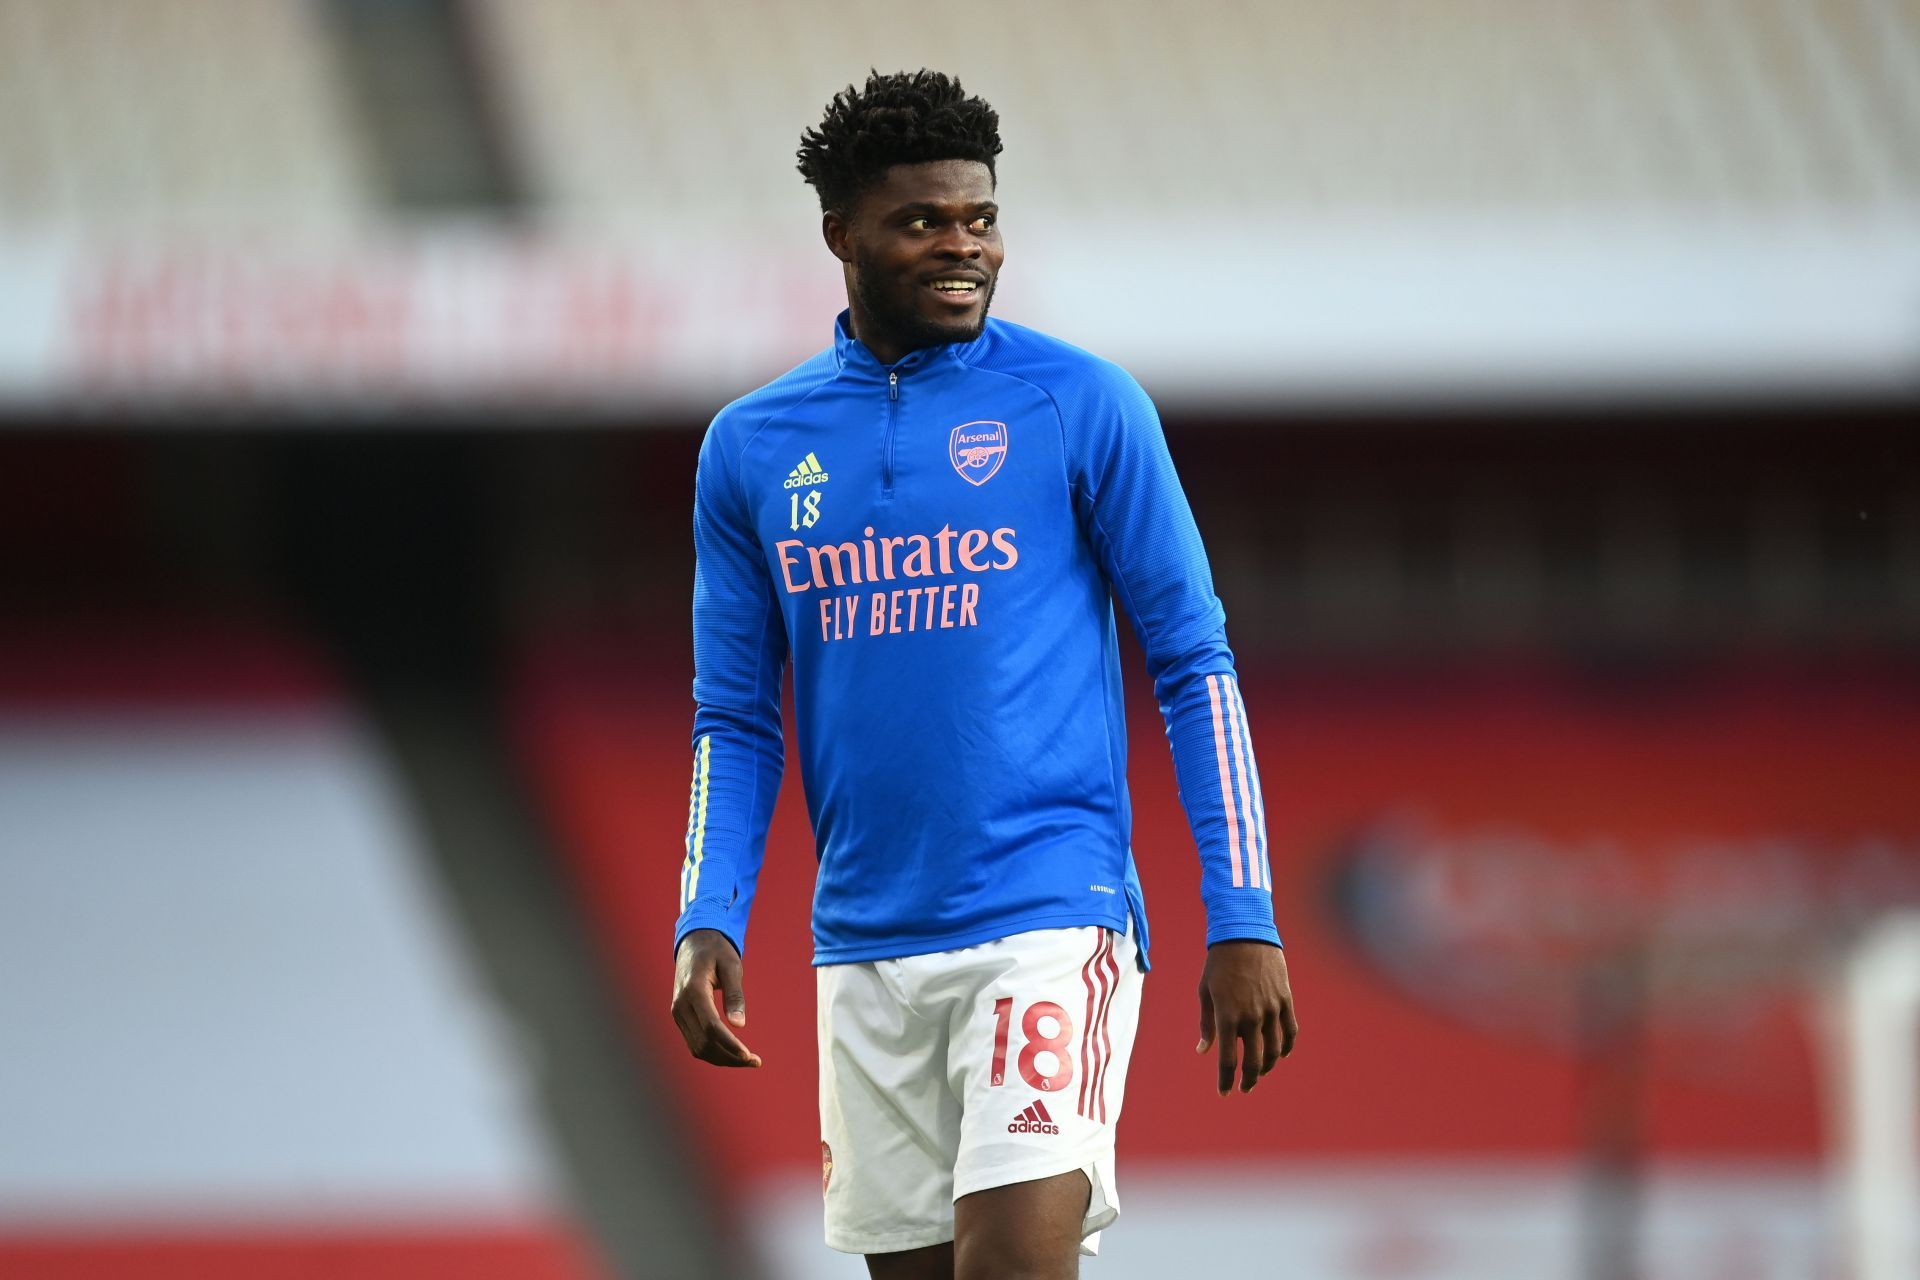 Juve are reportedly keen on Thomas Partey